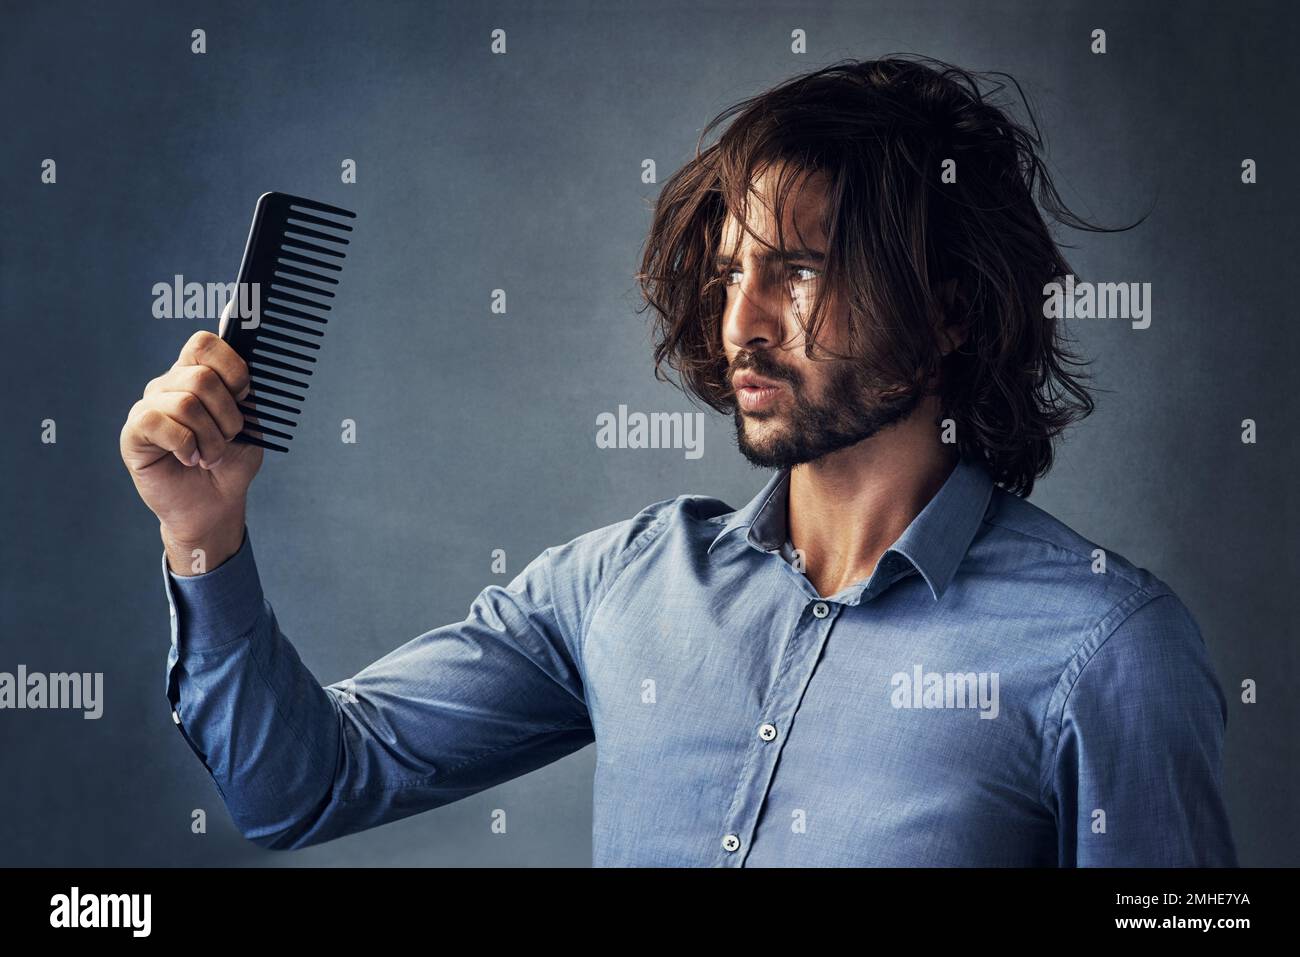 Youre supposed to be helping me. Studio shot of a handsome young man looking at his comb while brushing his hair against a grey background. Stock Photo